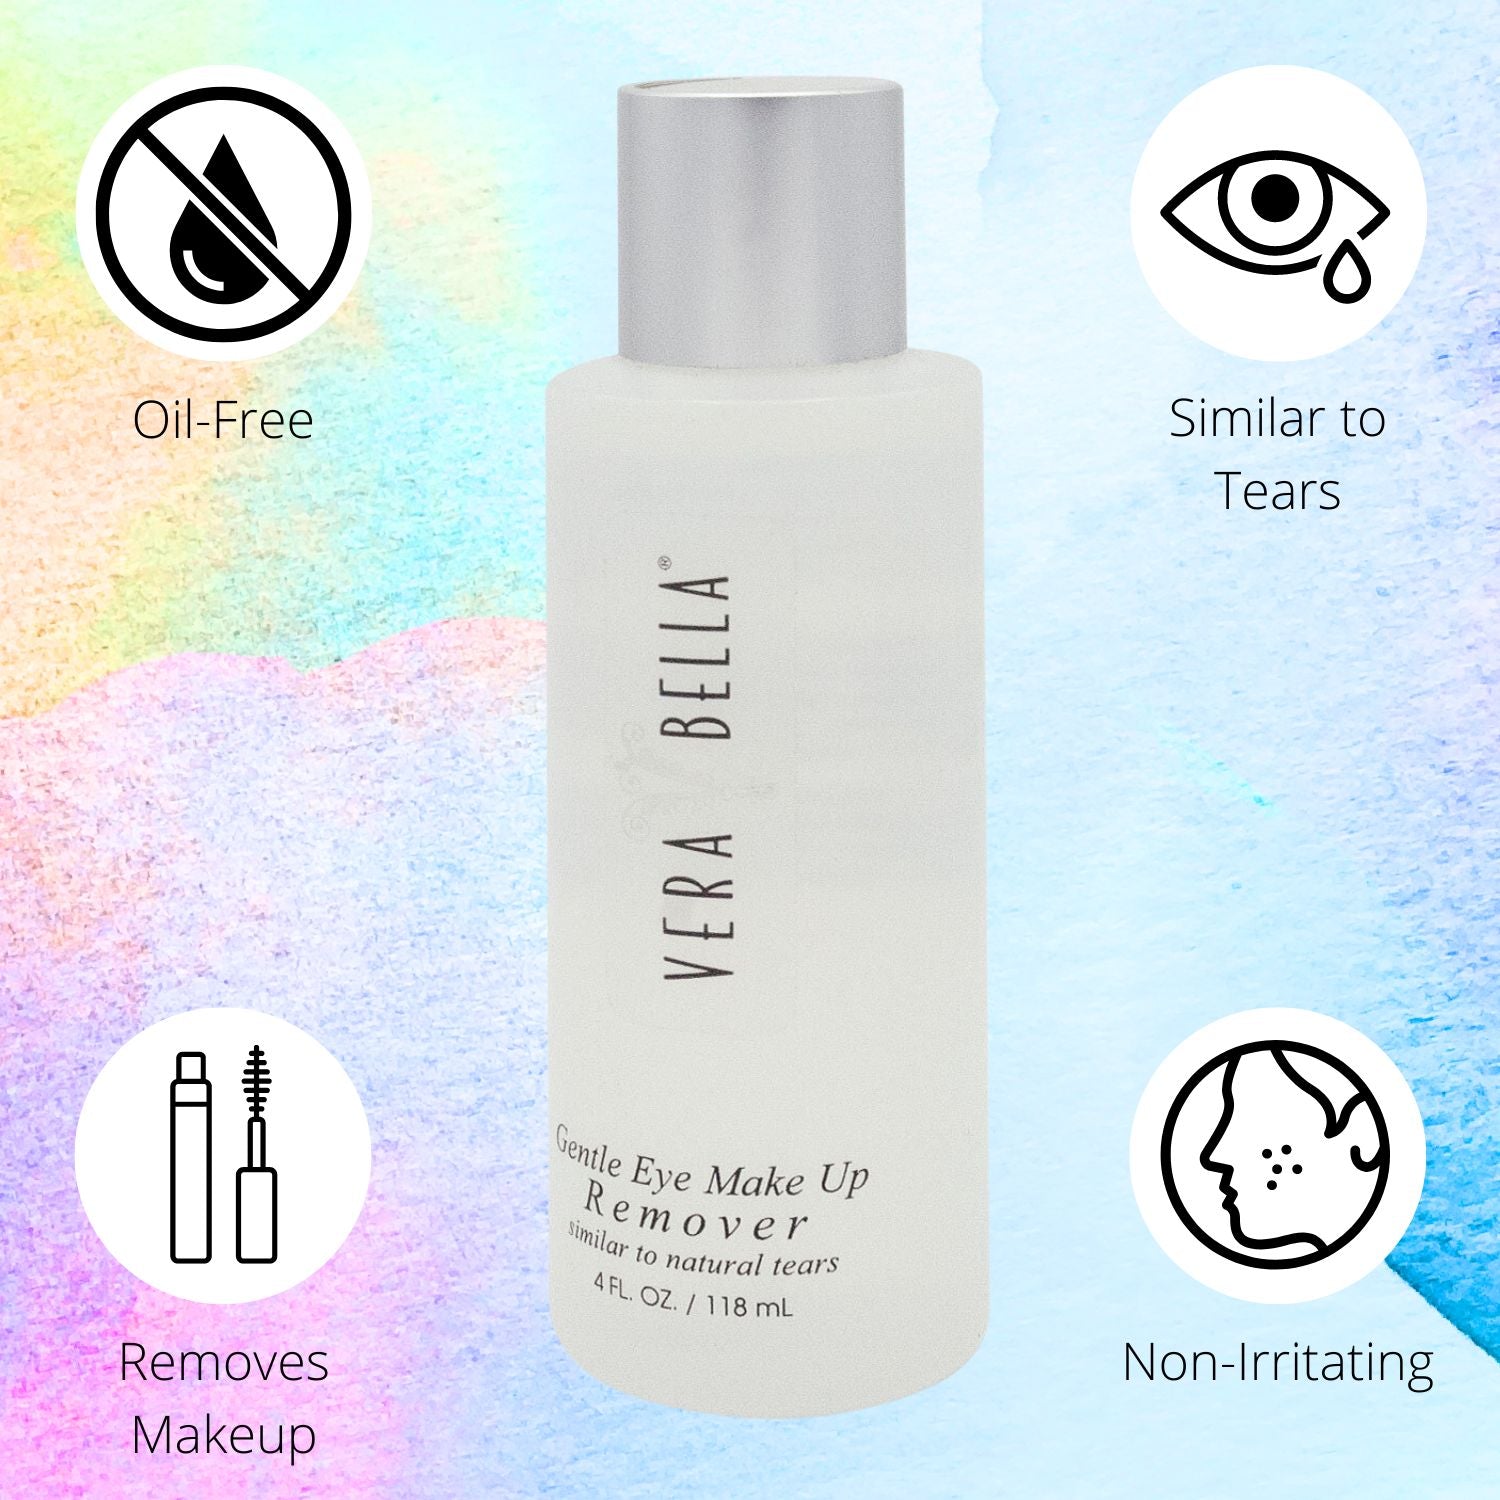 Verabella Eye Makeup Remover is non-irritating and similar to tears